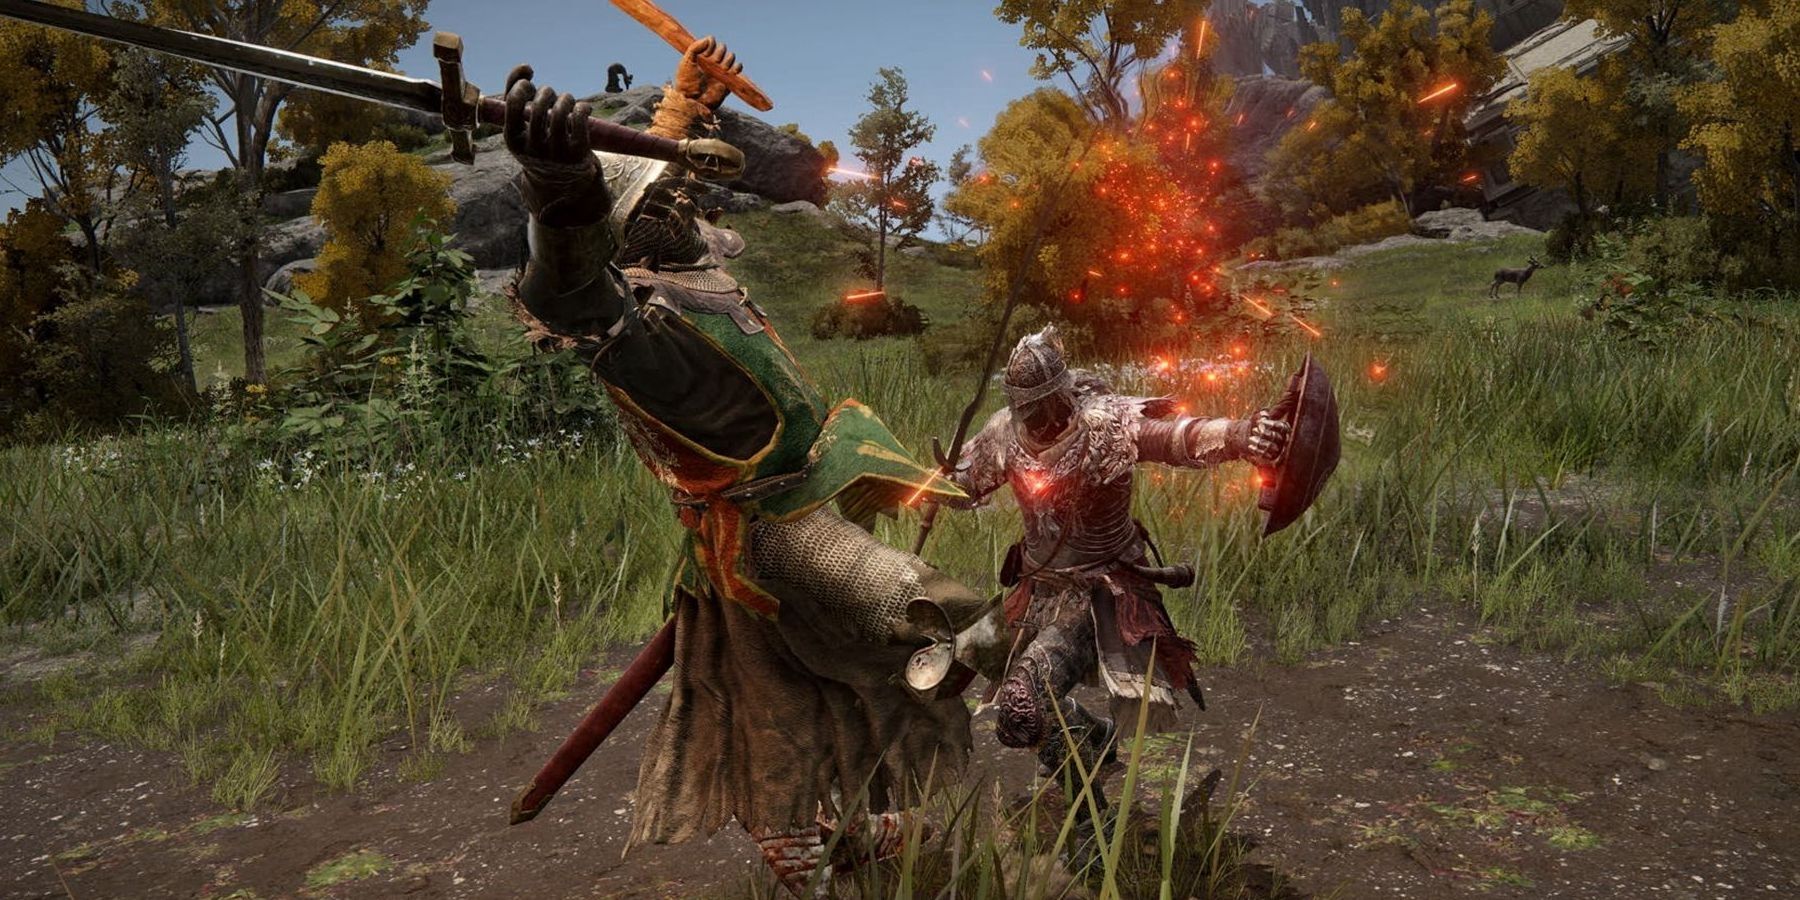 Elden Ring Player Shows How to Parry Many of the Game’s Bosses and Enemies